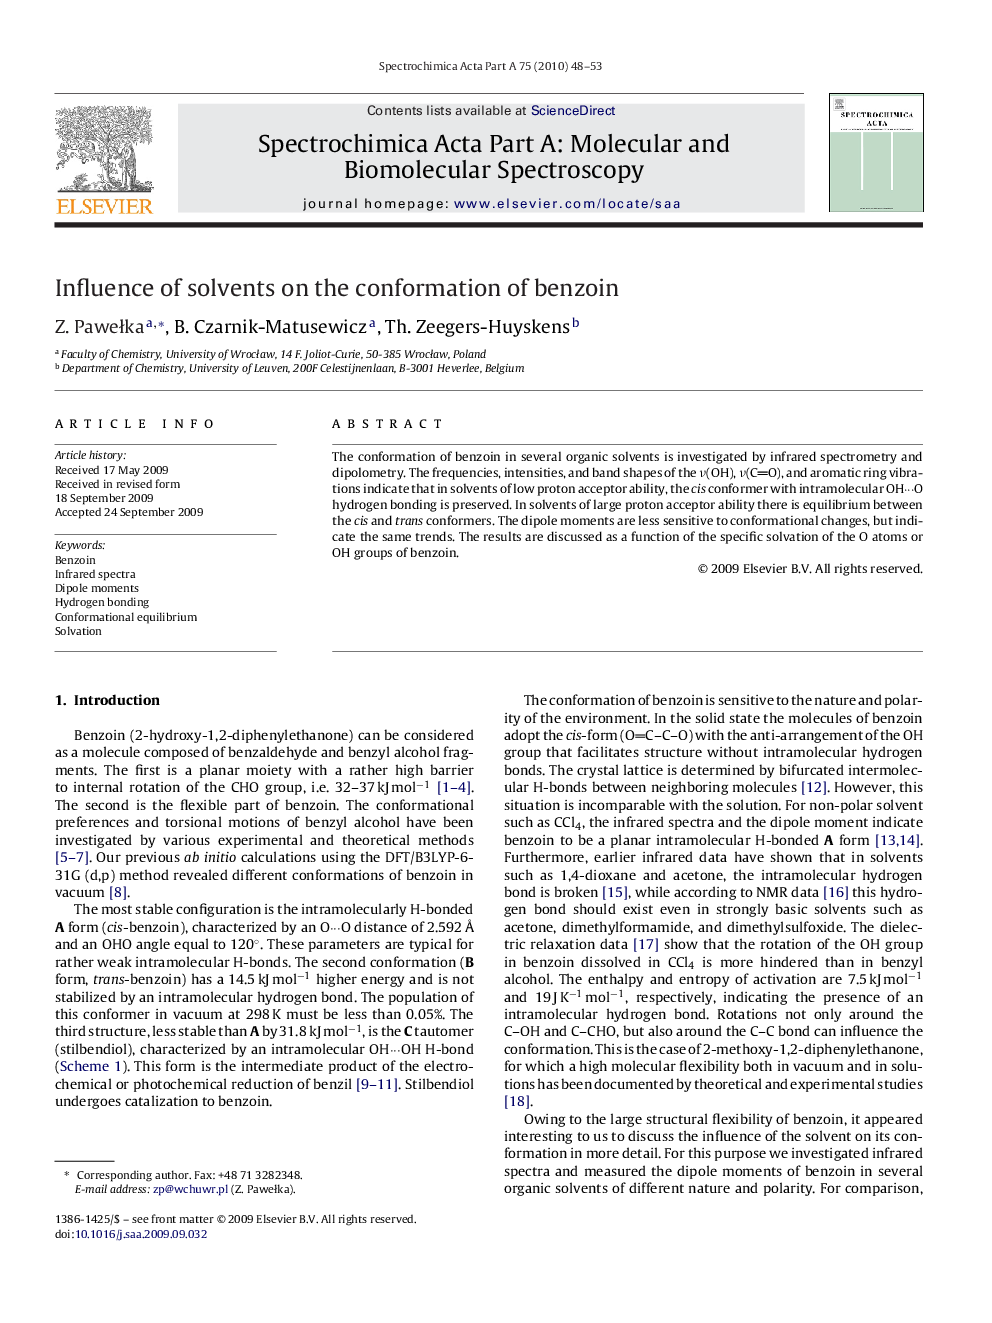 Influence of solvents on the conformation of benzoin